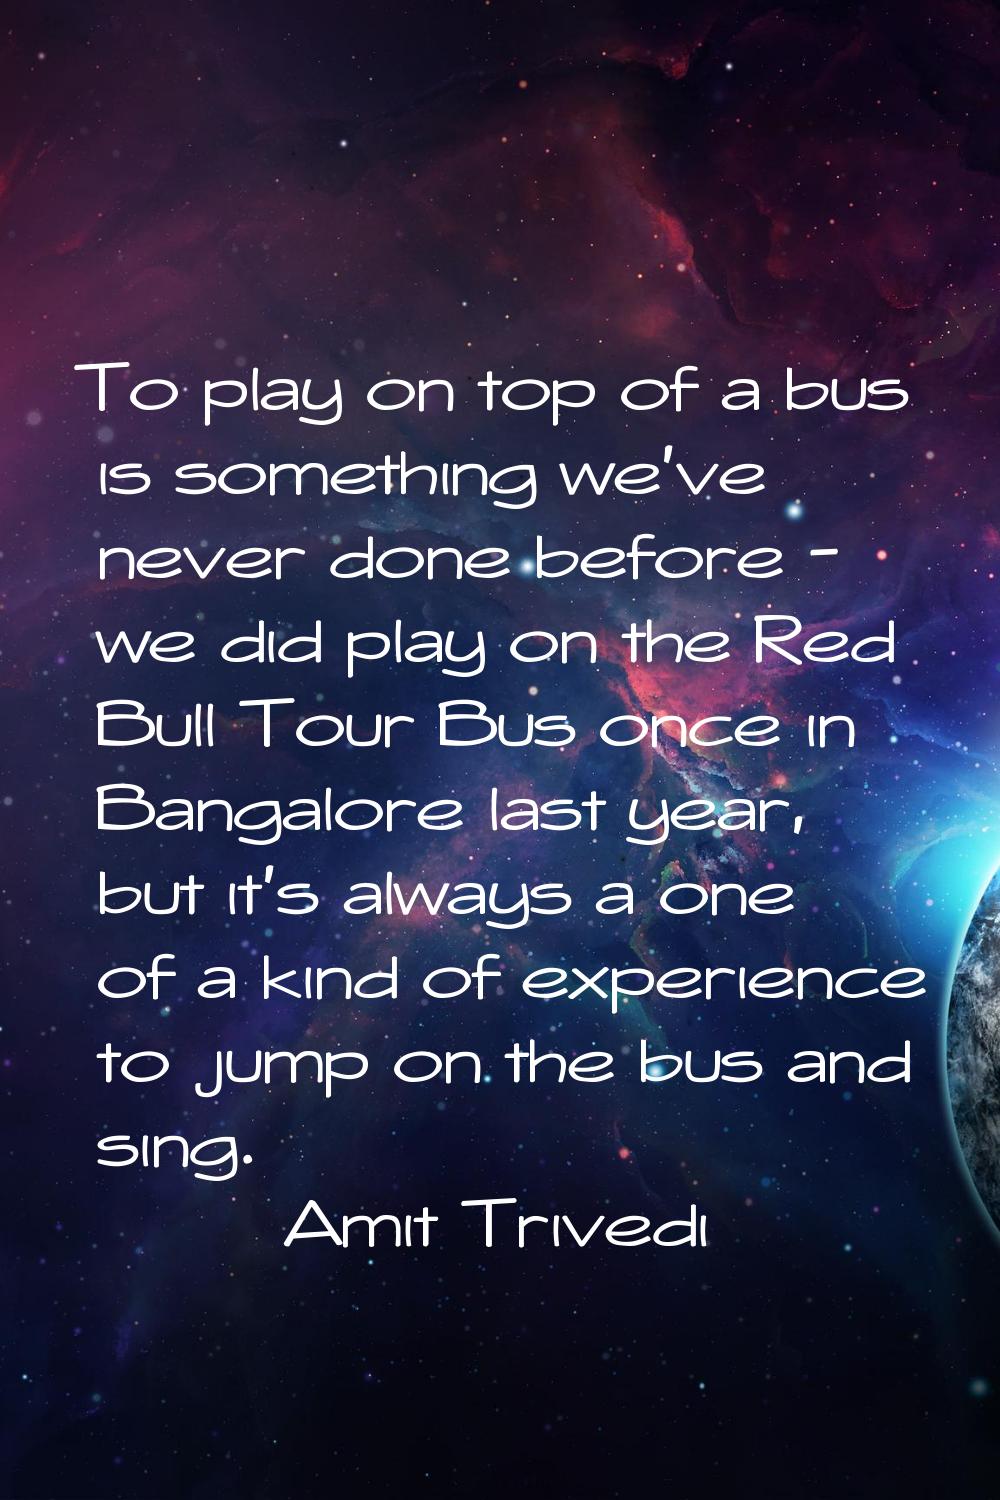 To play on top of a bus is something we've never done before - we did play on the Red Bull Tour Bus